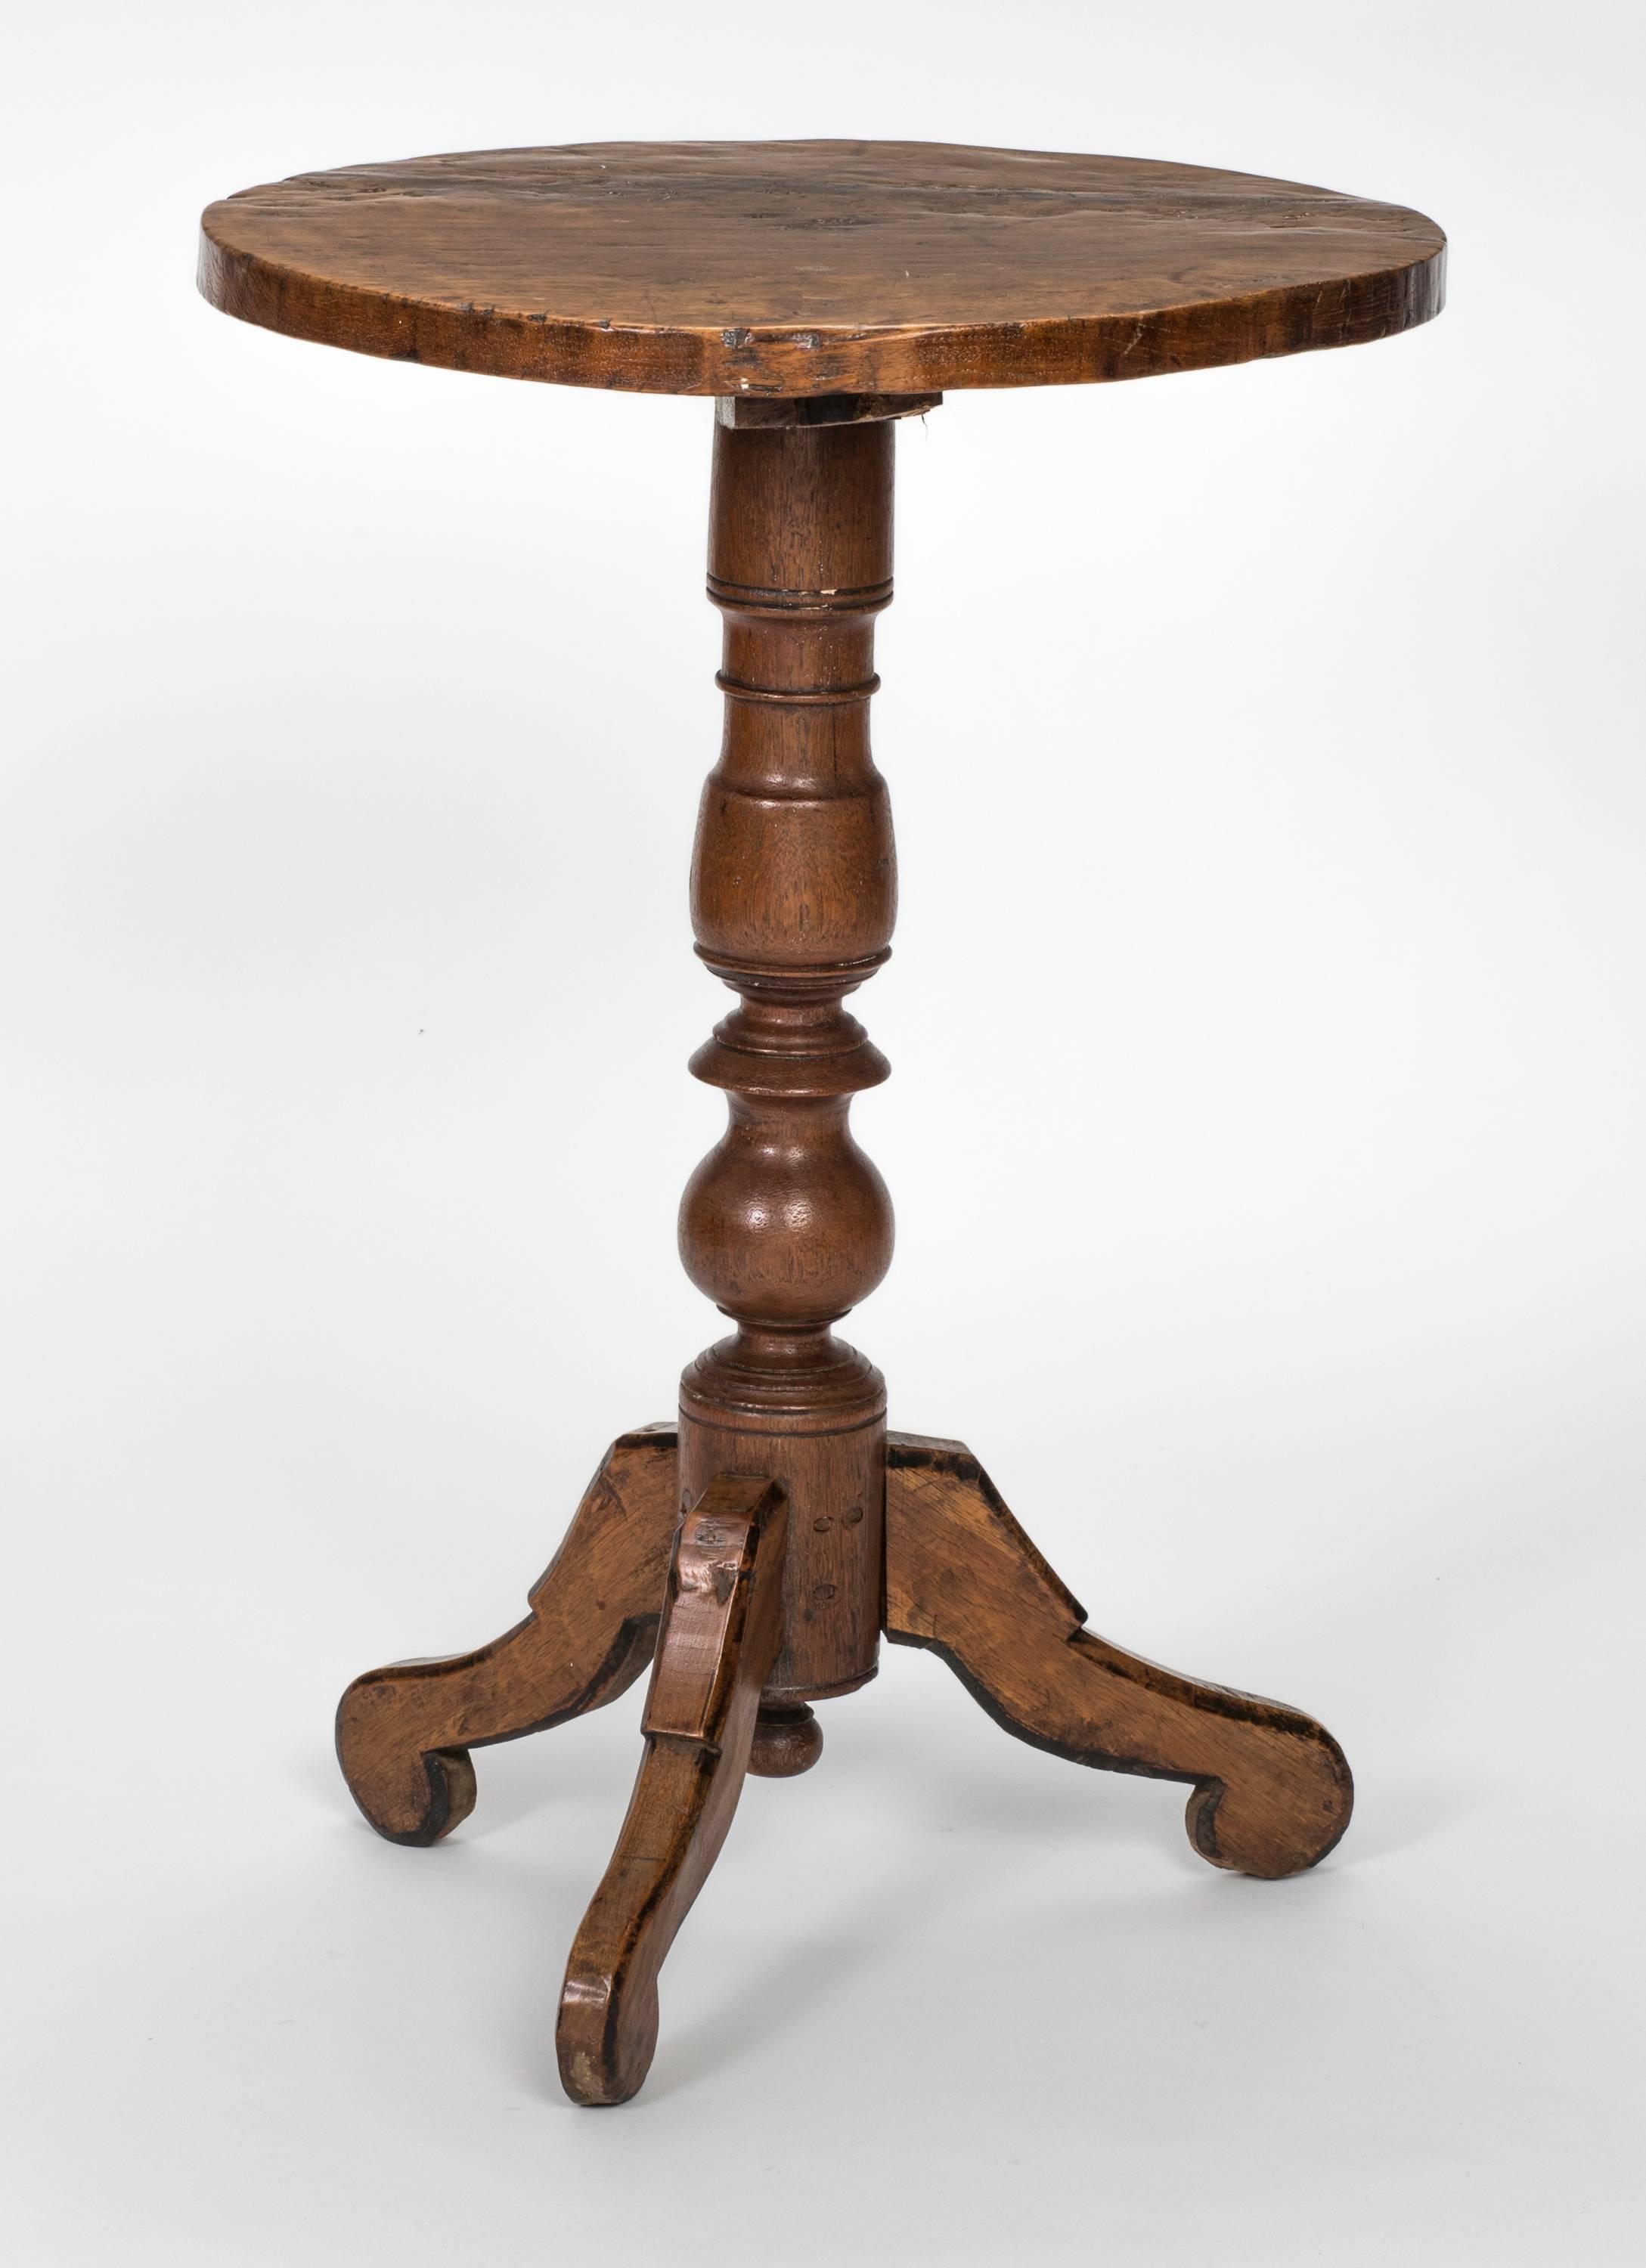 19th century French petit round pedestal table. Nicely worn rustic wood top. Handmade with mixture of wood. Base is elegantly turned pedestal with tripod feet. Great little side wine table.